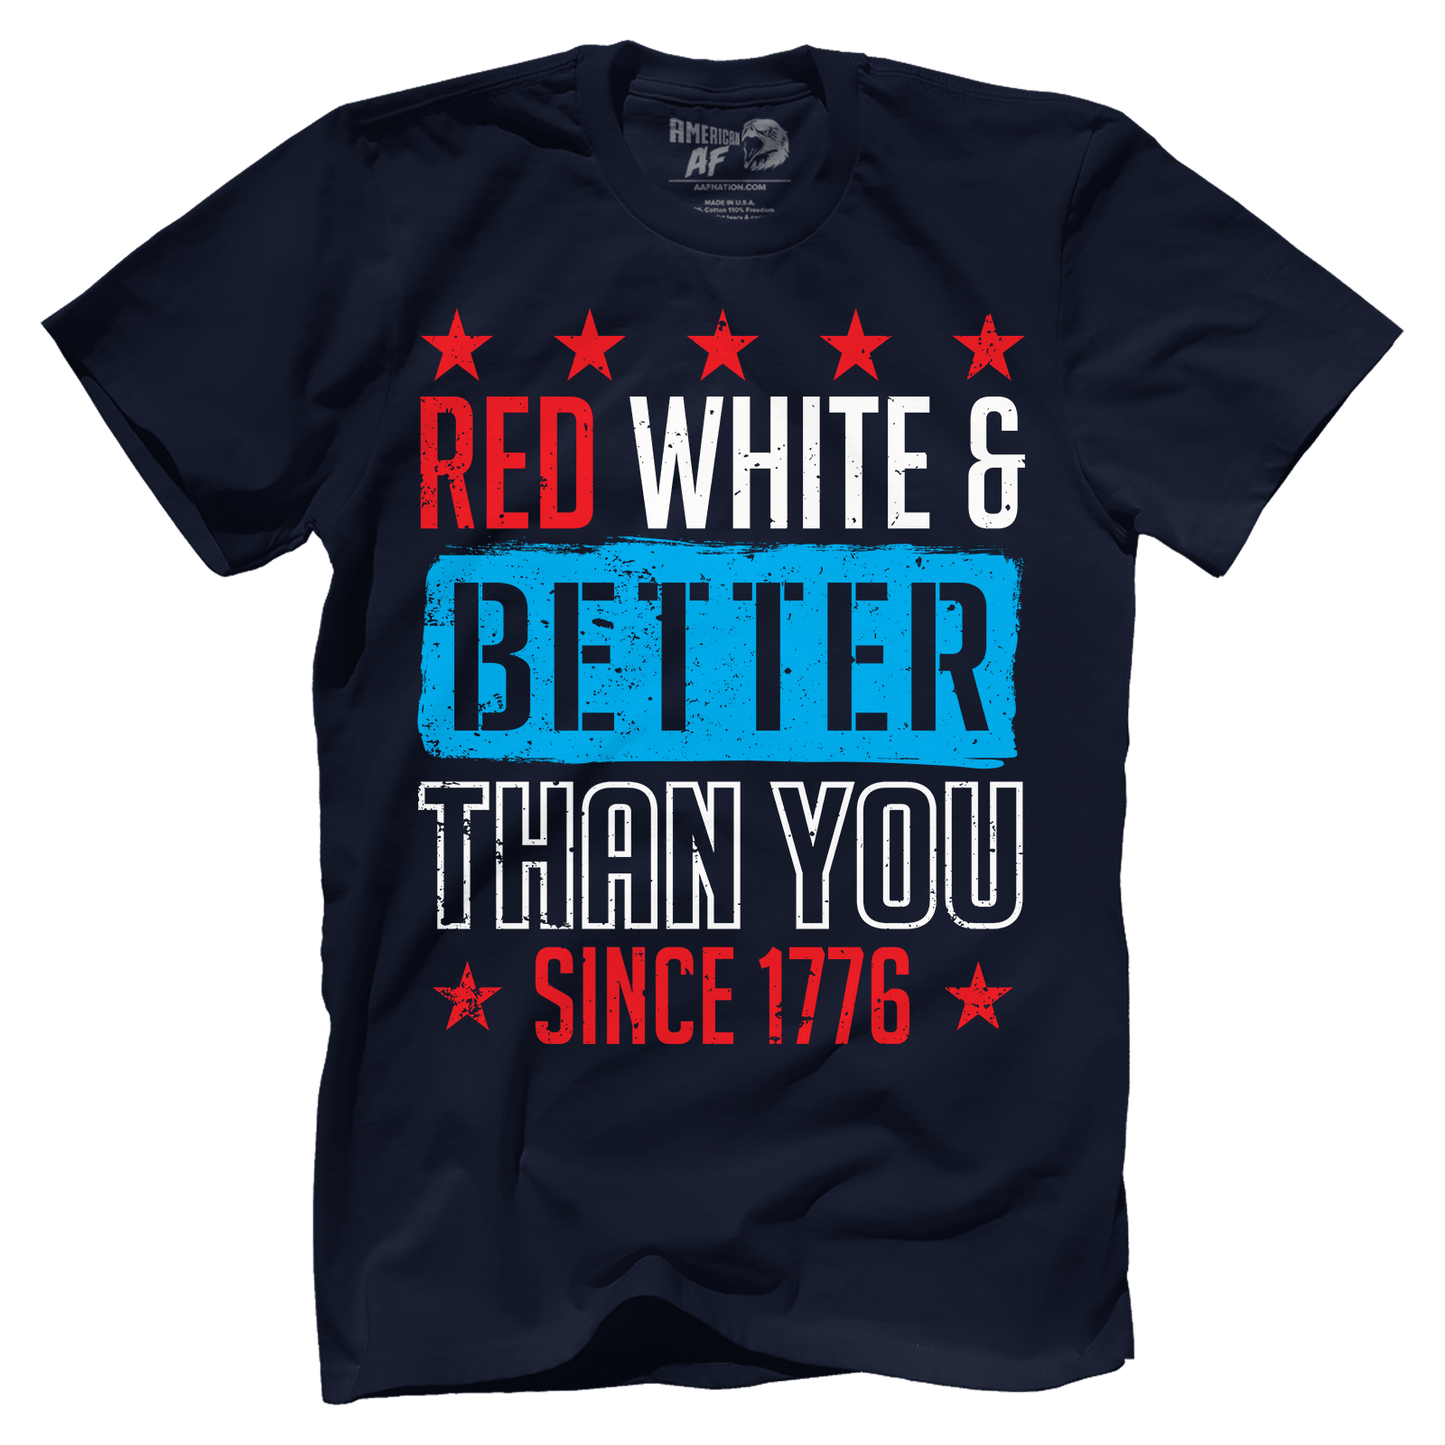 T-shirt Premium Mens Shirt / Midnight Navy / XS Red, White, and Better Than You Since 1776